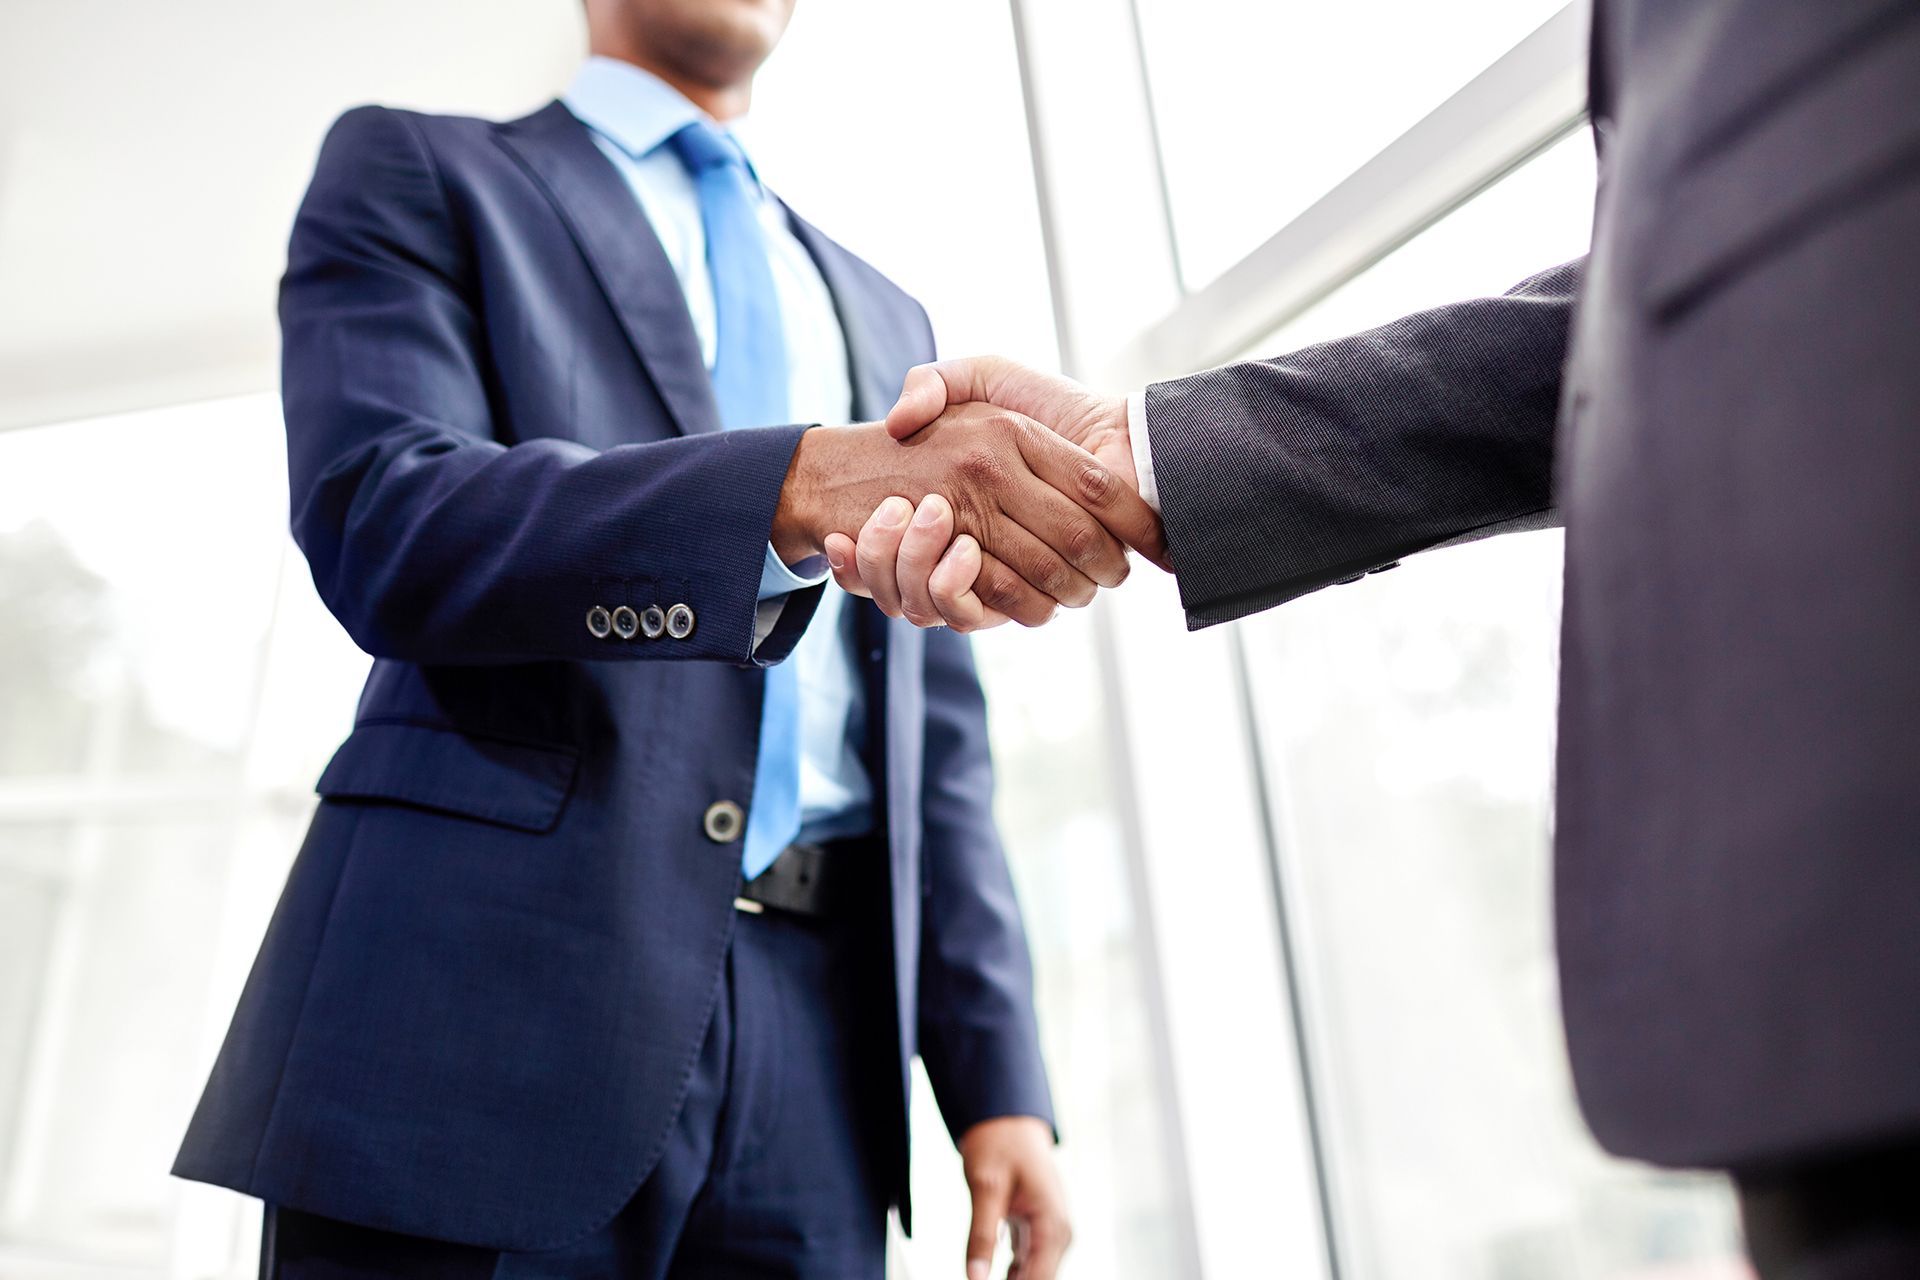 Private Investigator Shaking Hands With Client